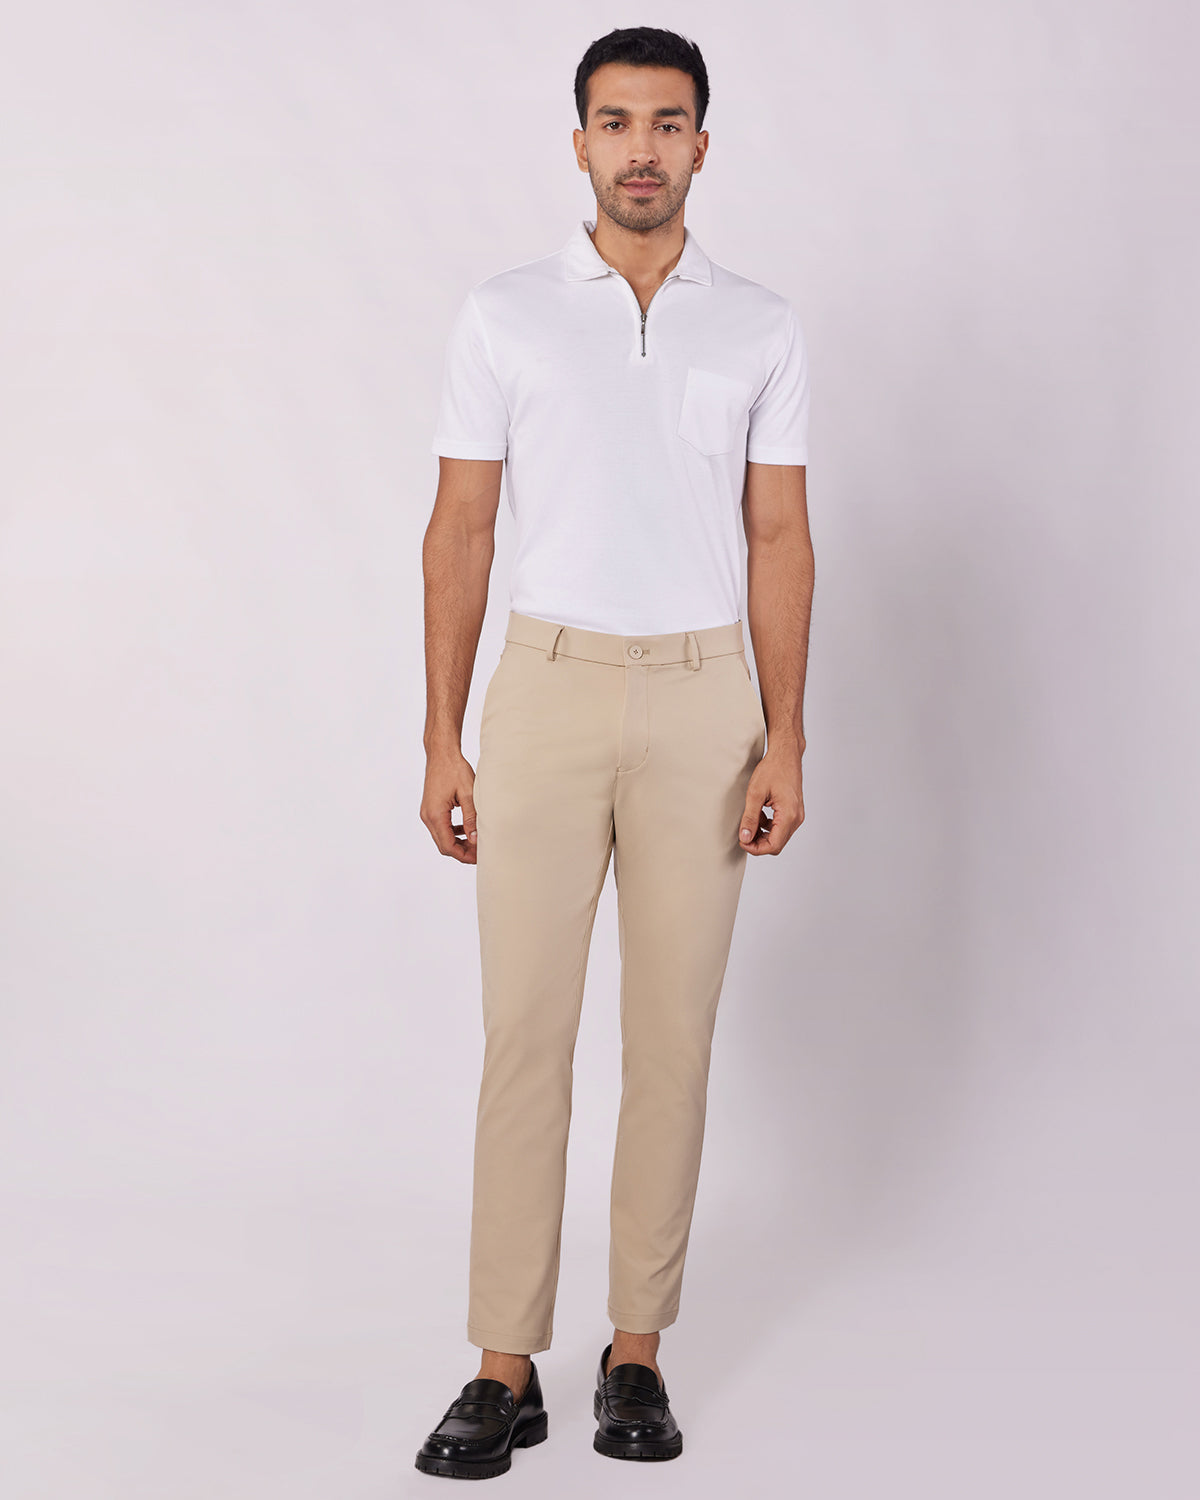 Beige Colour Outfit And Combinations Ideas For Men. | Mens casual outfits,  Mens casual outfits summer, Mens business casual outfits